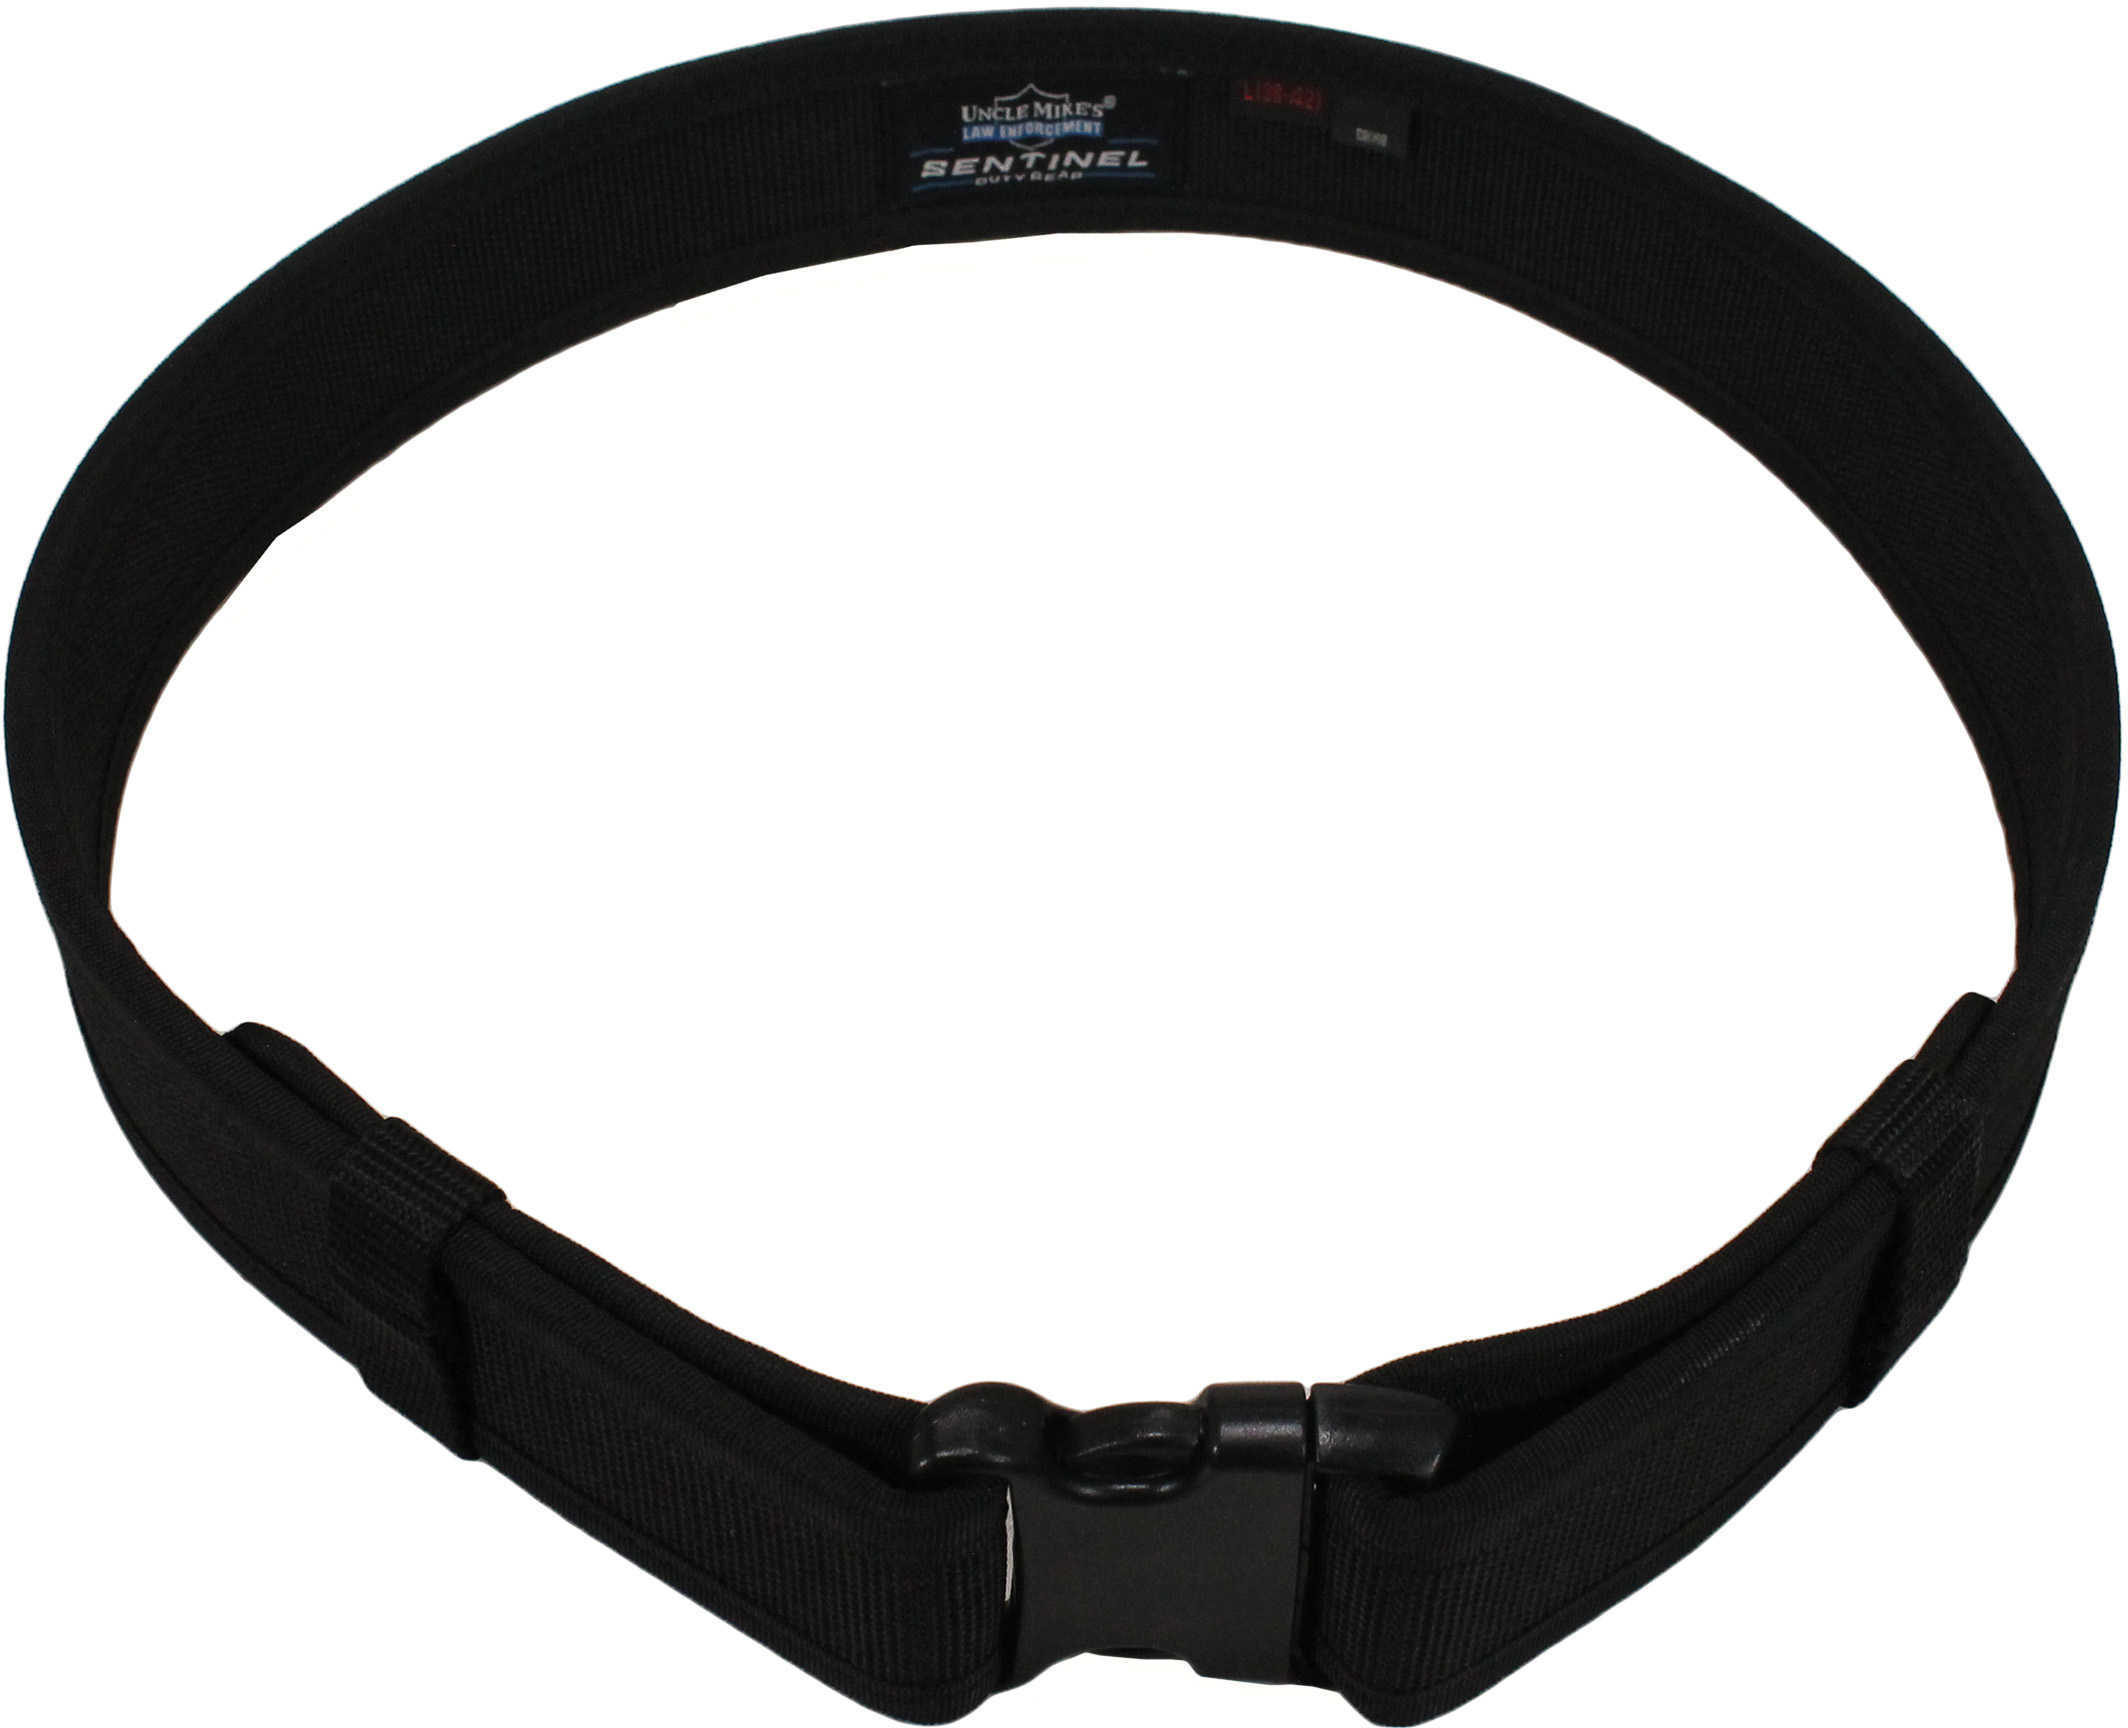 Uncle Mikes Sentinel Duty Gear Nylon Belt Large Size 38"-42" Black Md: 89083